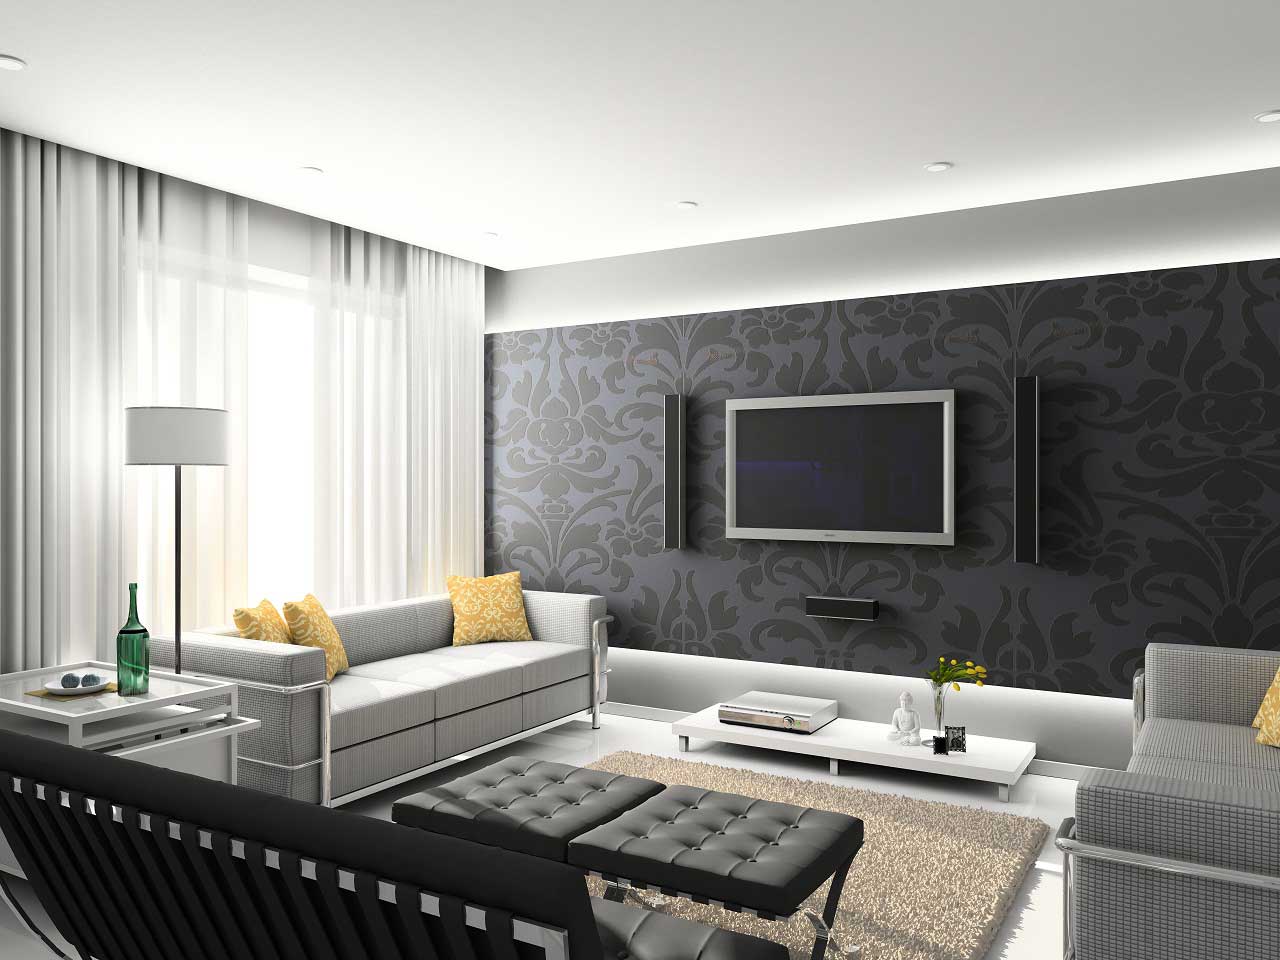 Living Room Small Modern Living Room Sets For Small Apartments Design Ideas With Elegant Silver Frame Wall Mounted LCD TV Set Design And Inspiring White Sofa Bed Set Also Charming Rug Carpet Design Living Room Beautiful Living Room Sets As Suitable Furniture